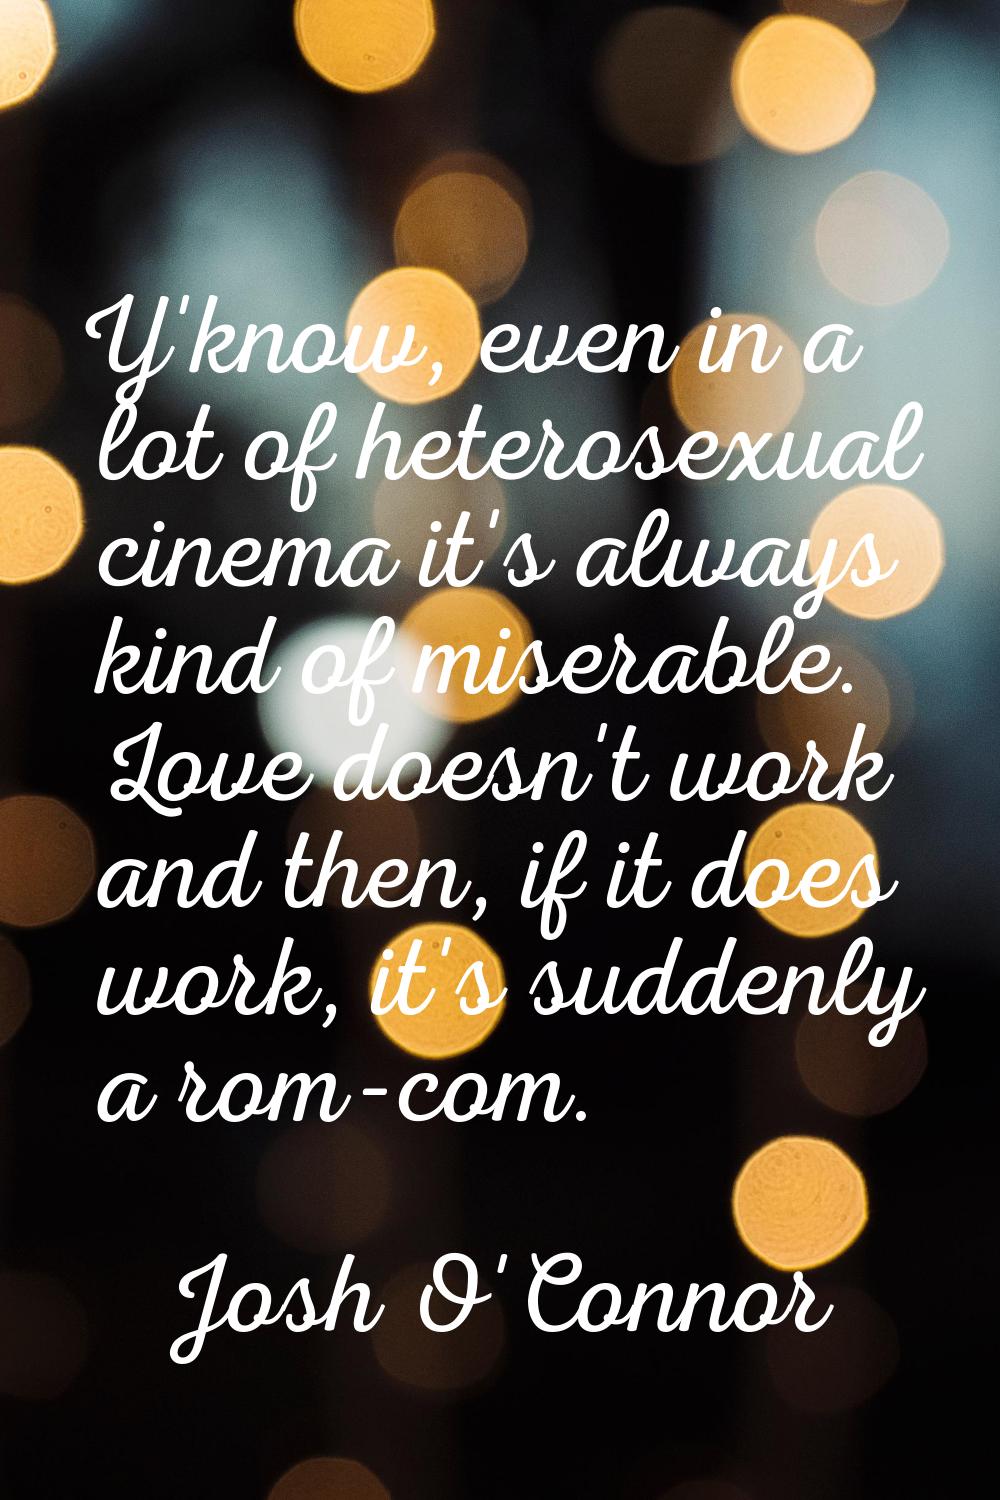 Y'know, even in a lot of heterosexual cinema it's always kind of miserable. Love doesn't work and t